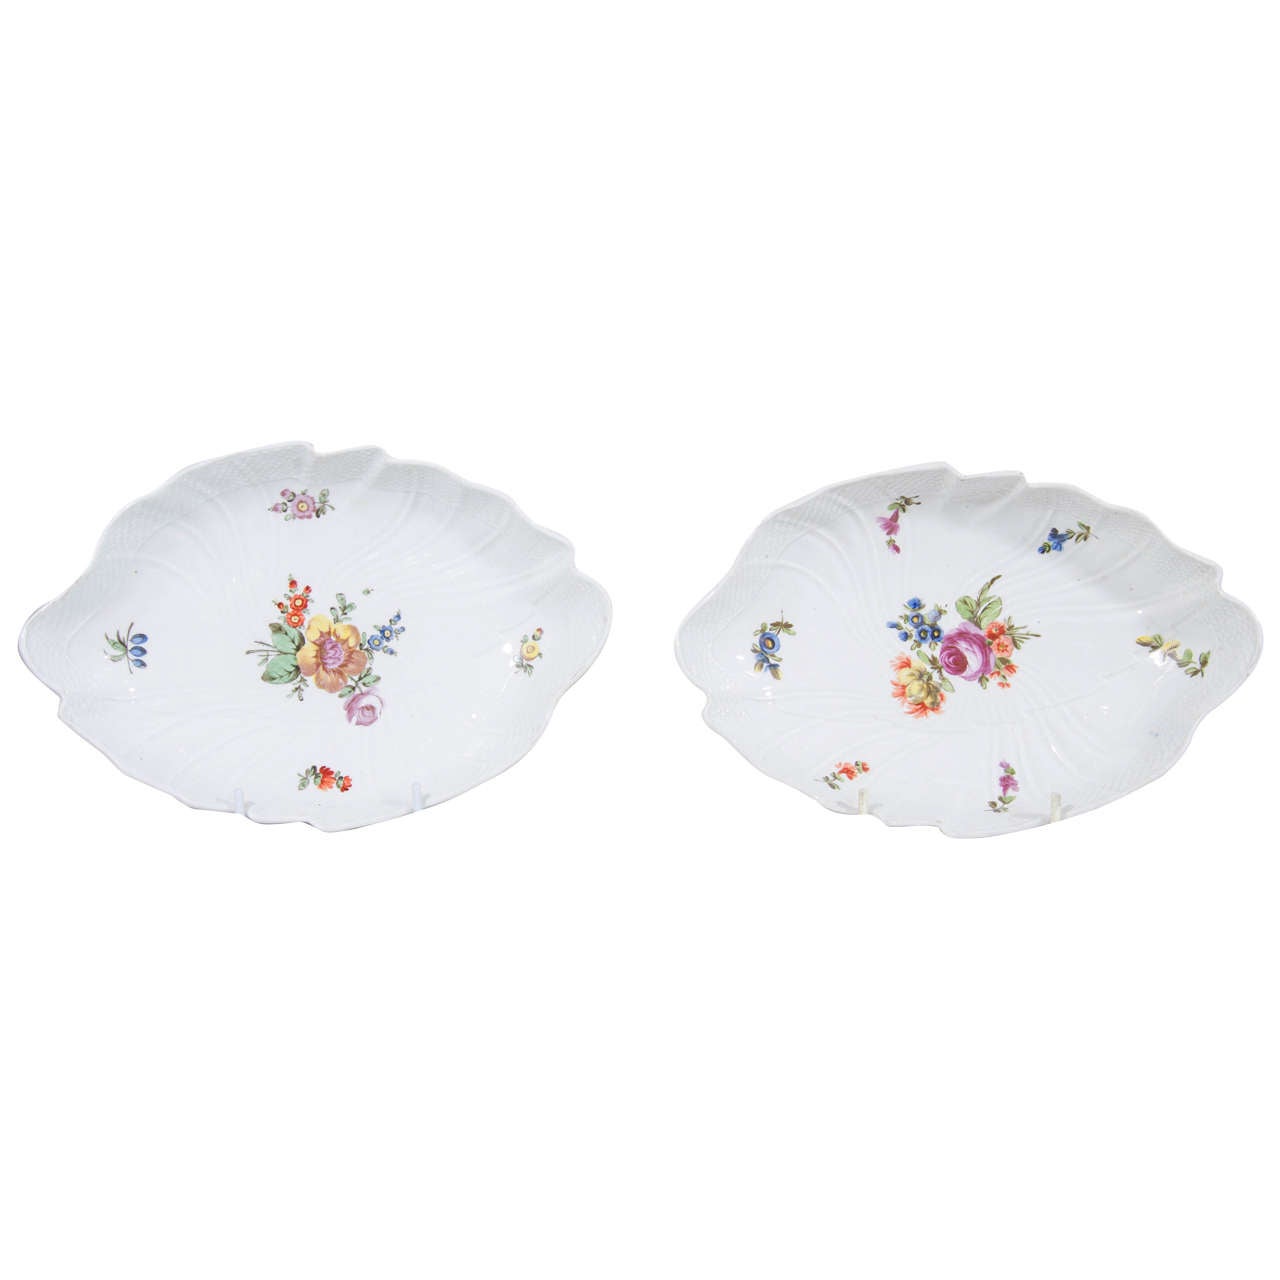 A lovely pair of 18th century hard paste porcelain dishes shaped as leaves. Molded in the style of Meissen with a border of double-curved ribbing and a band of fine osier basketwork at the edge. Each painted with a beautiful bouquet and detached